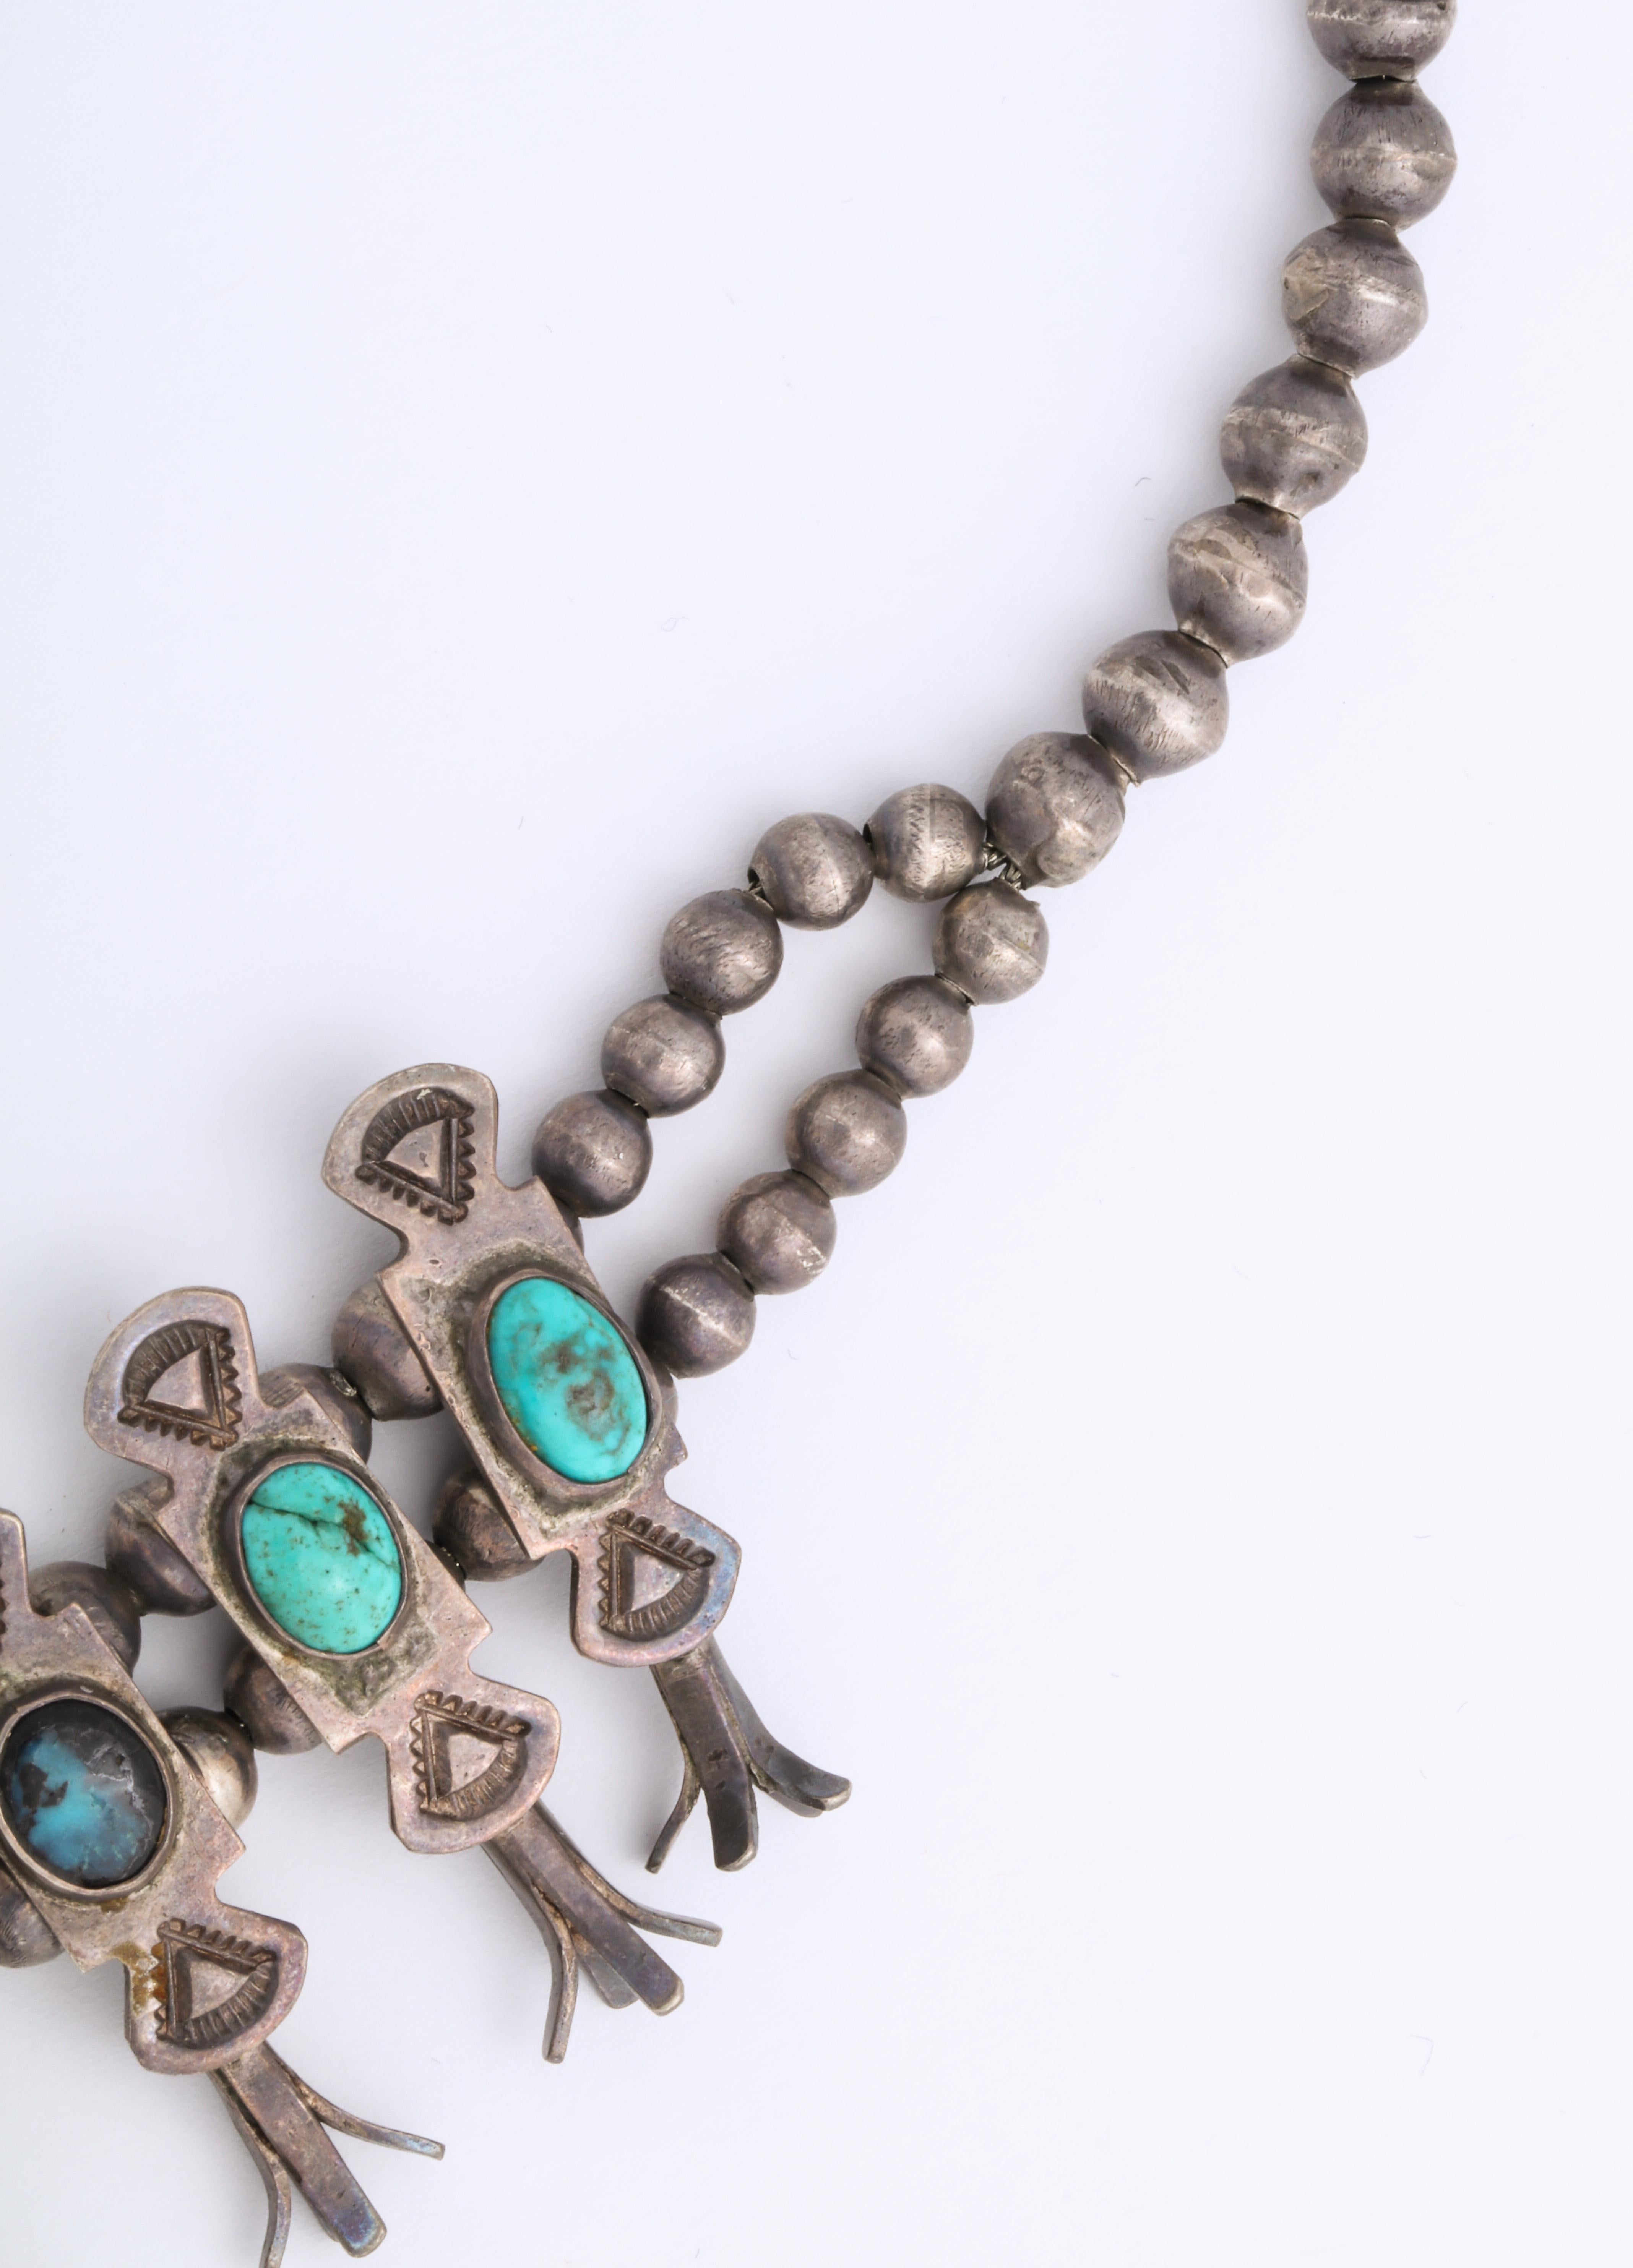 Artist Vintage Navajo Silver and Turquoise Squash Blossom Necklace by Eskie Tsosie For Sale